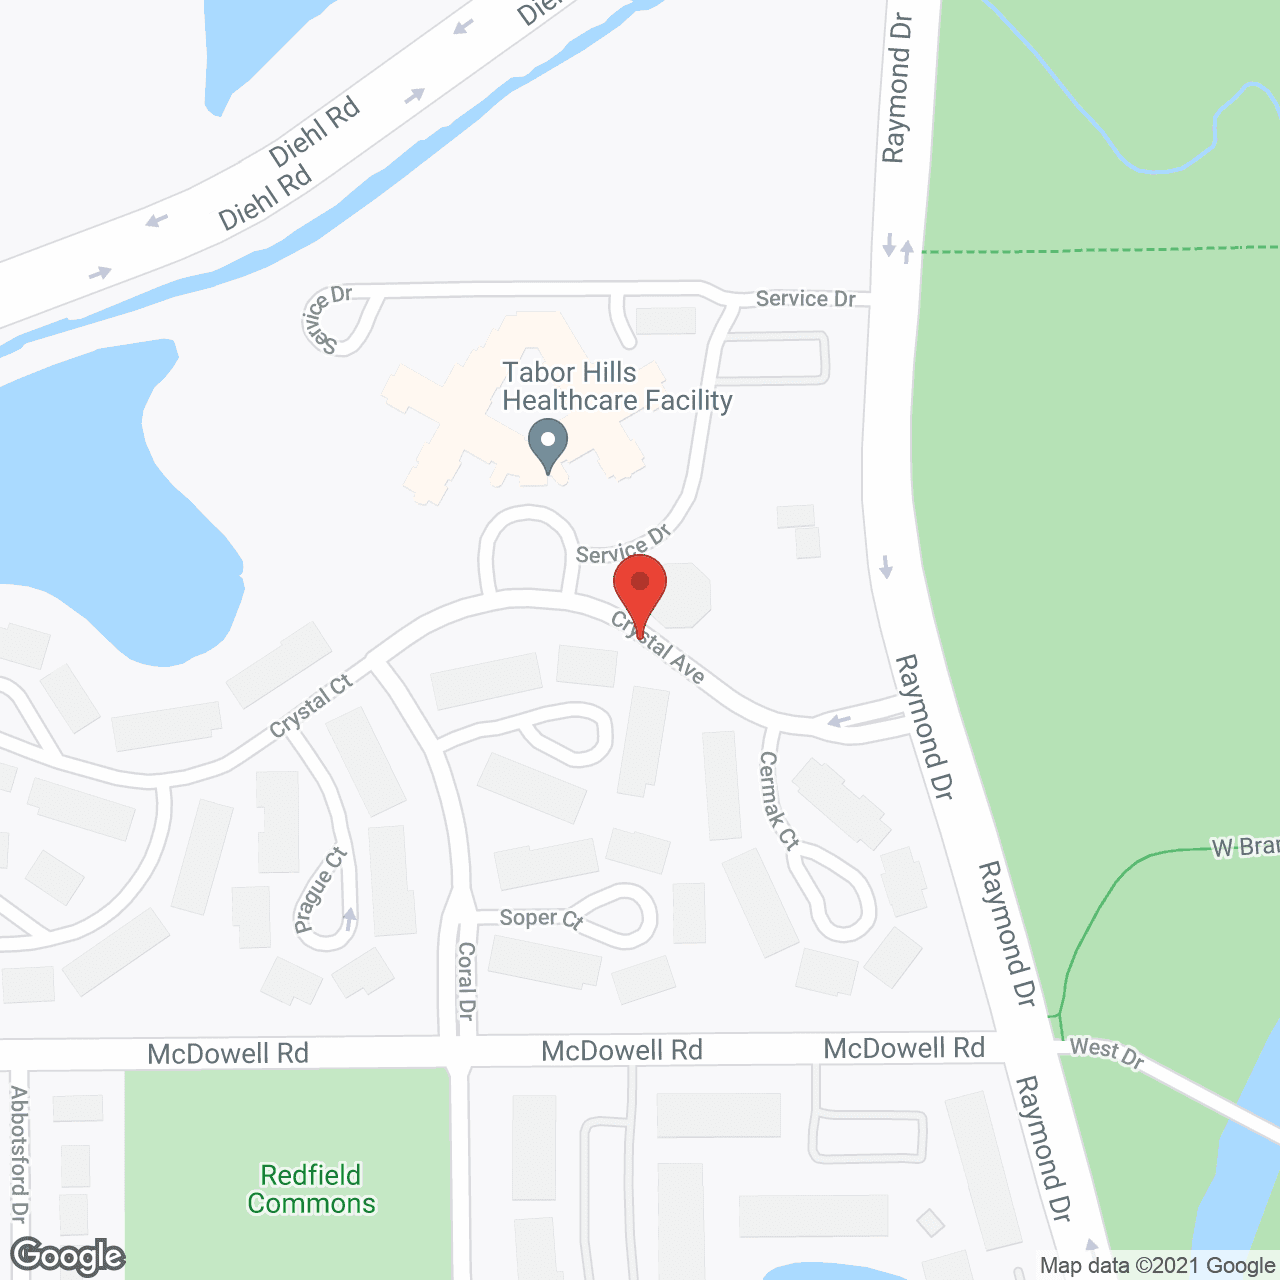 Tabor Hills Healthcare in google map